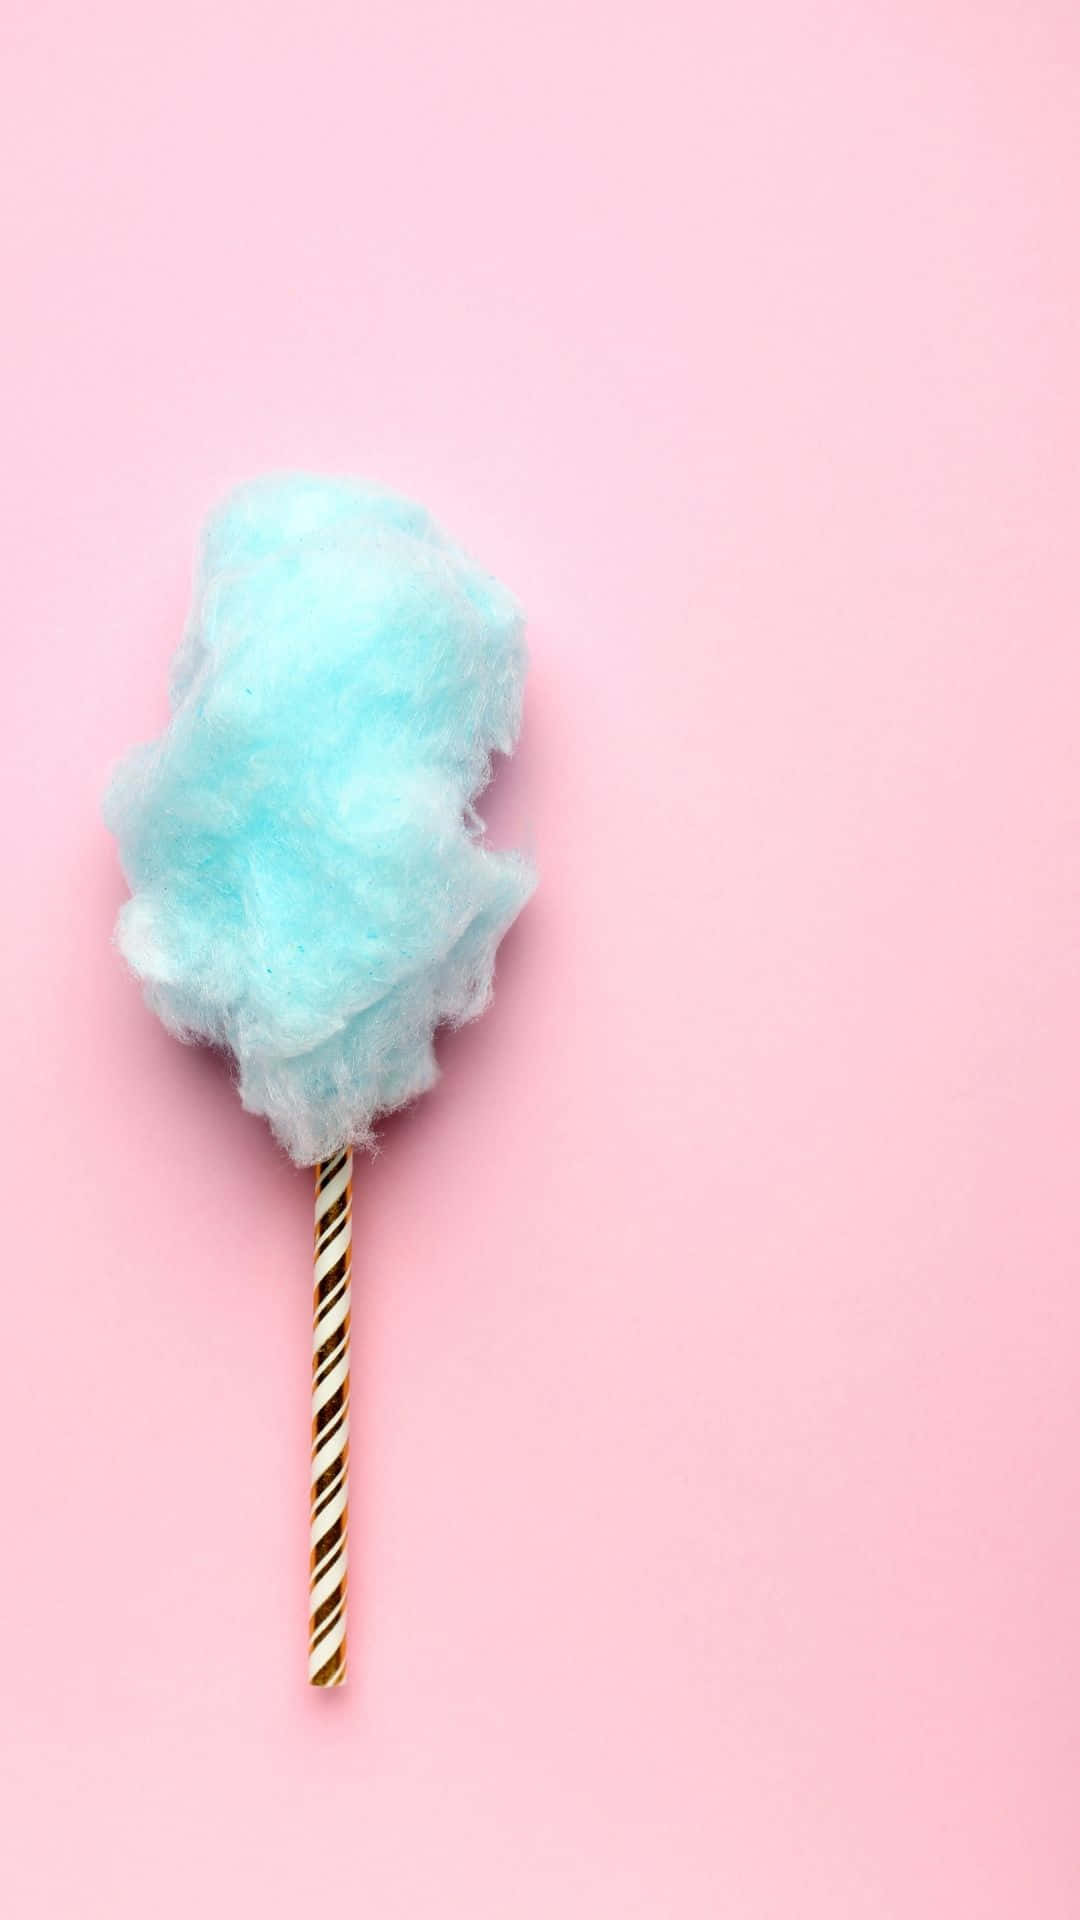 A Whimsical Cotton Candy Cloud Wallpaper